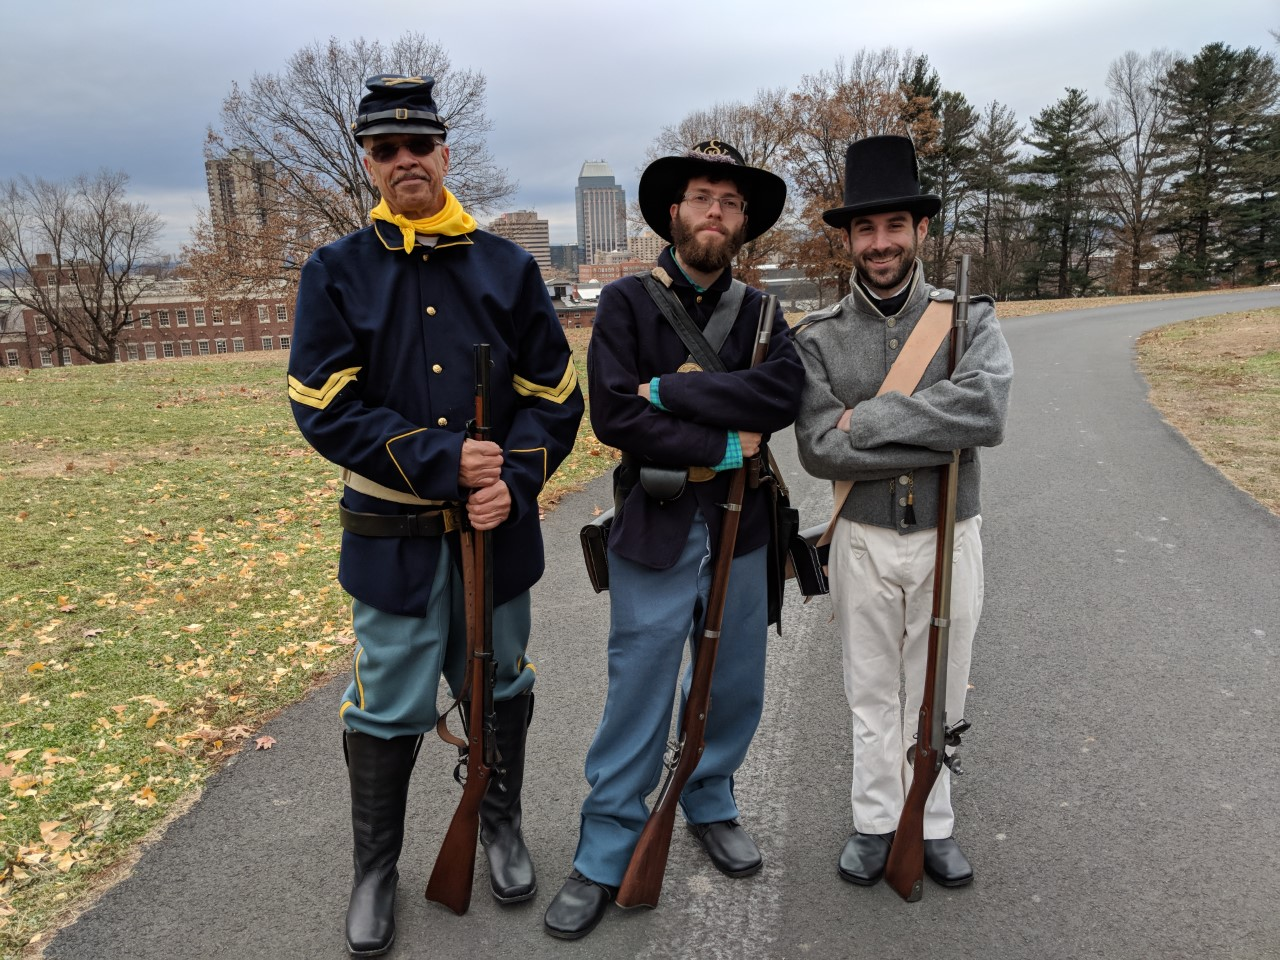 Three men in historic costumes from significant periods of firearms developments